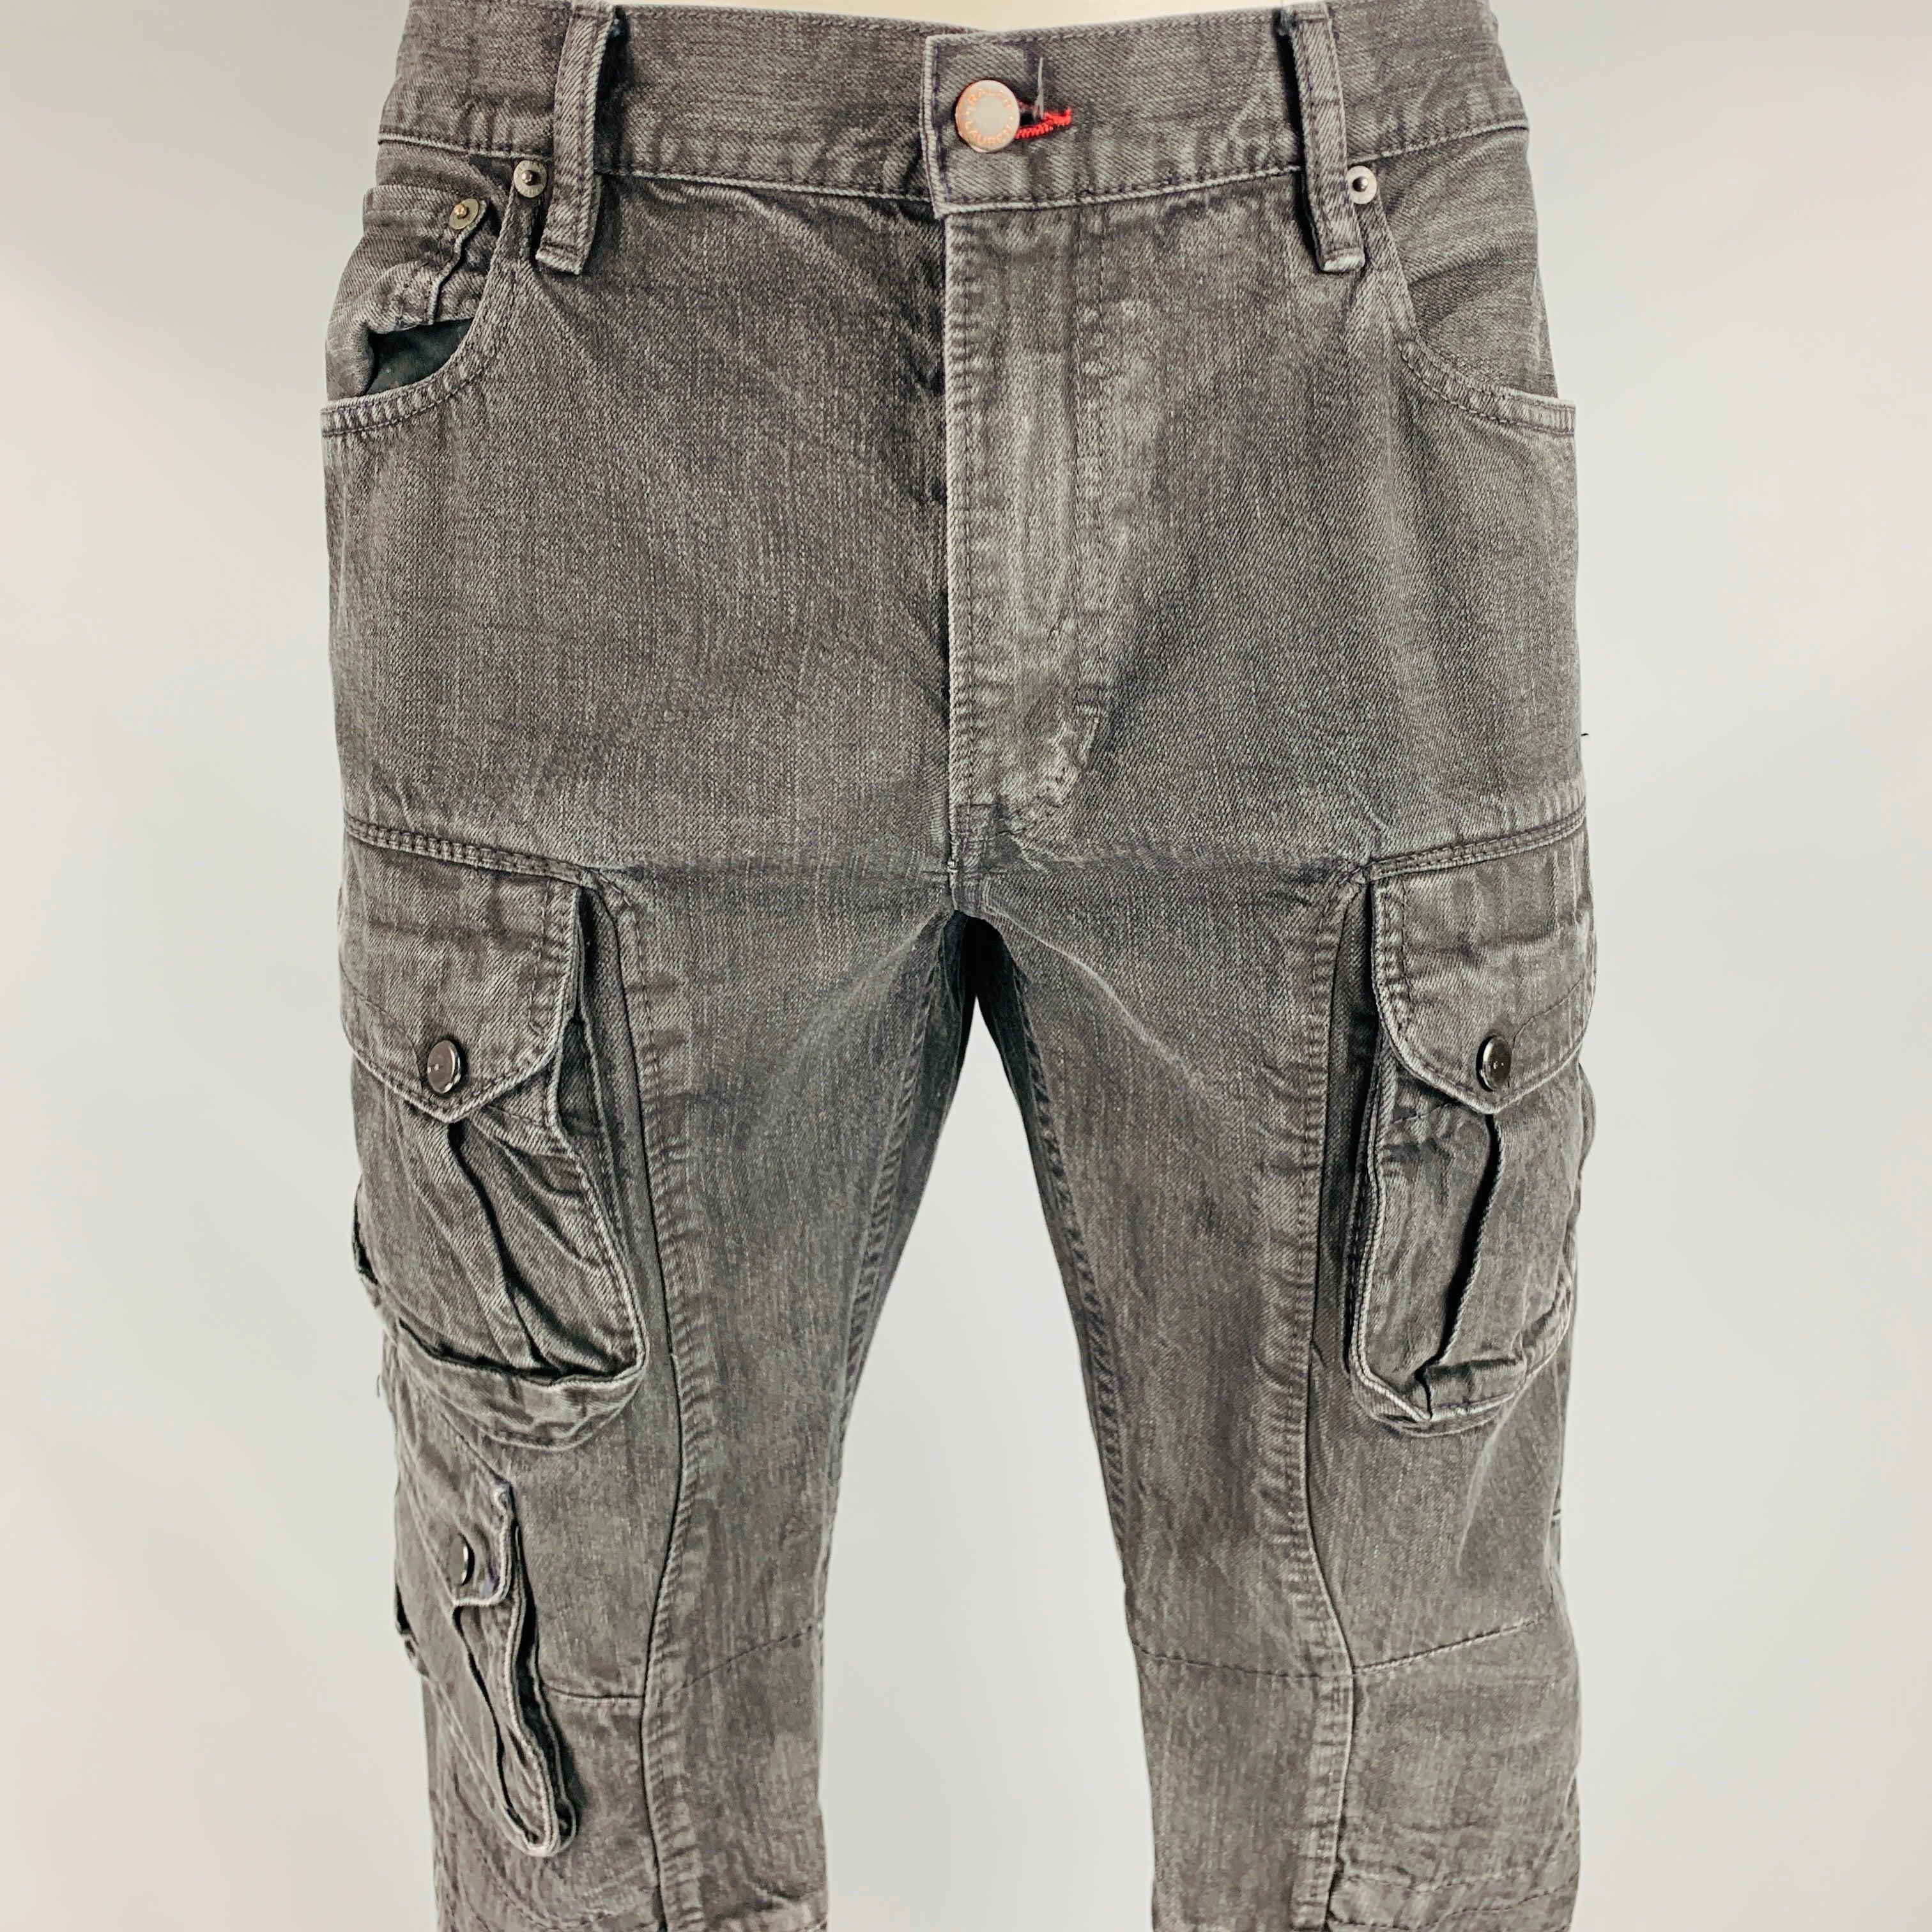 RALPH LAUREN BLACK LABEL jeans
in a black wash denim fabric featuring multiple utilitarian snap pockets, ankle zip & snap details, and zip fly closure. Excellent Pre-Owned Condition. 

Marked:   36/32 

Measurements: 
  Waist: 36 inches Rise: 9.5